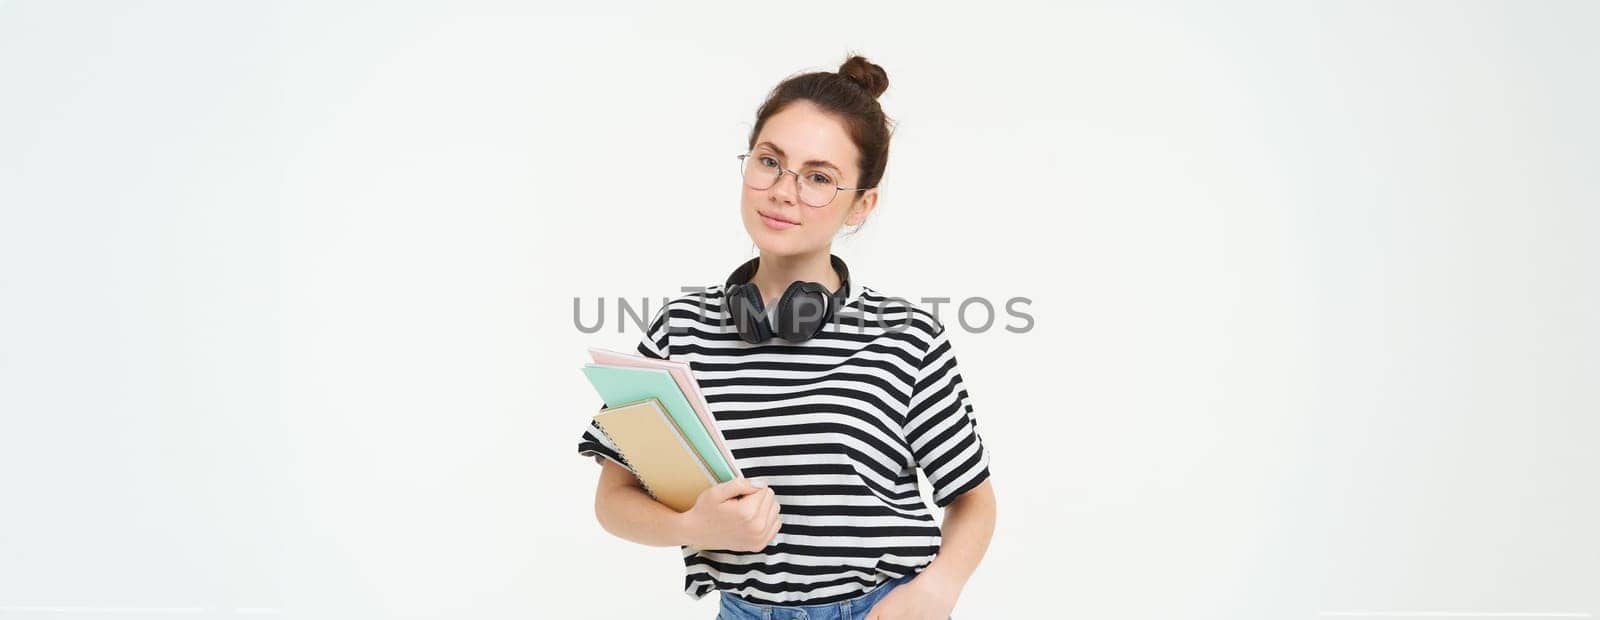 Education concept. Smiling brunette girl, student in casual clothes, holds her books, study material, wears headphones over neck, looks confident and happy, isolated over white background.